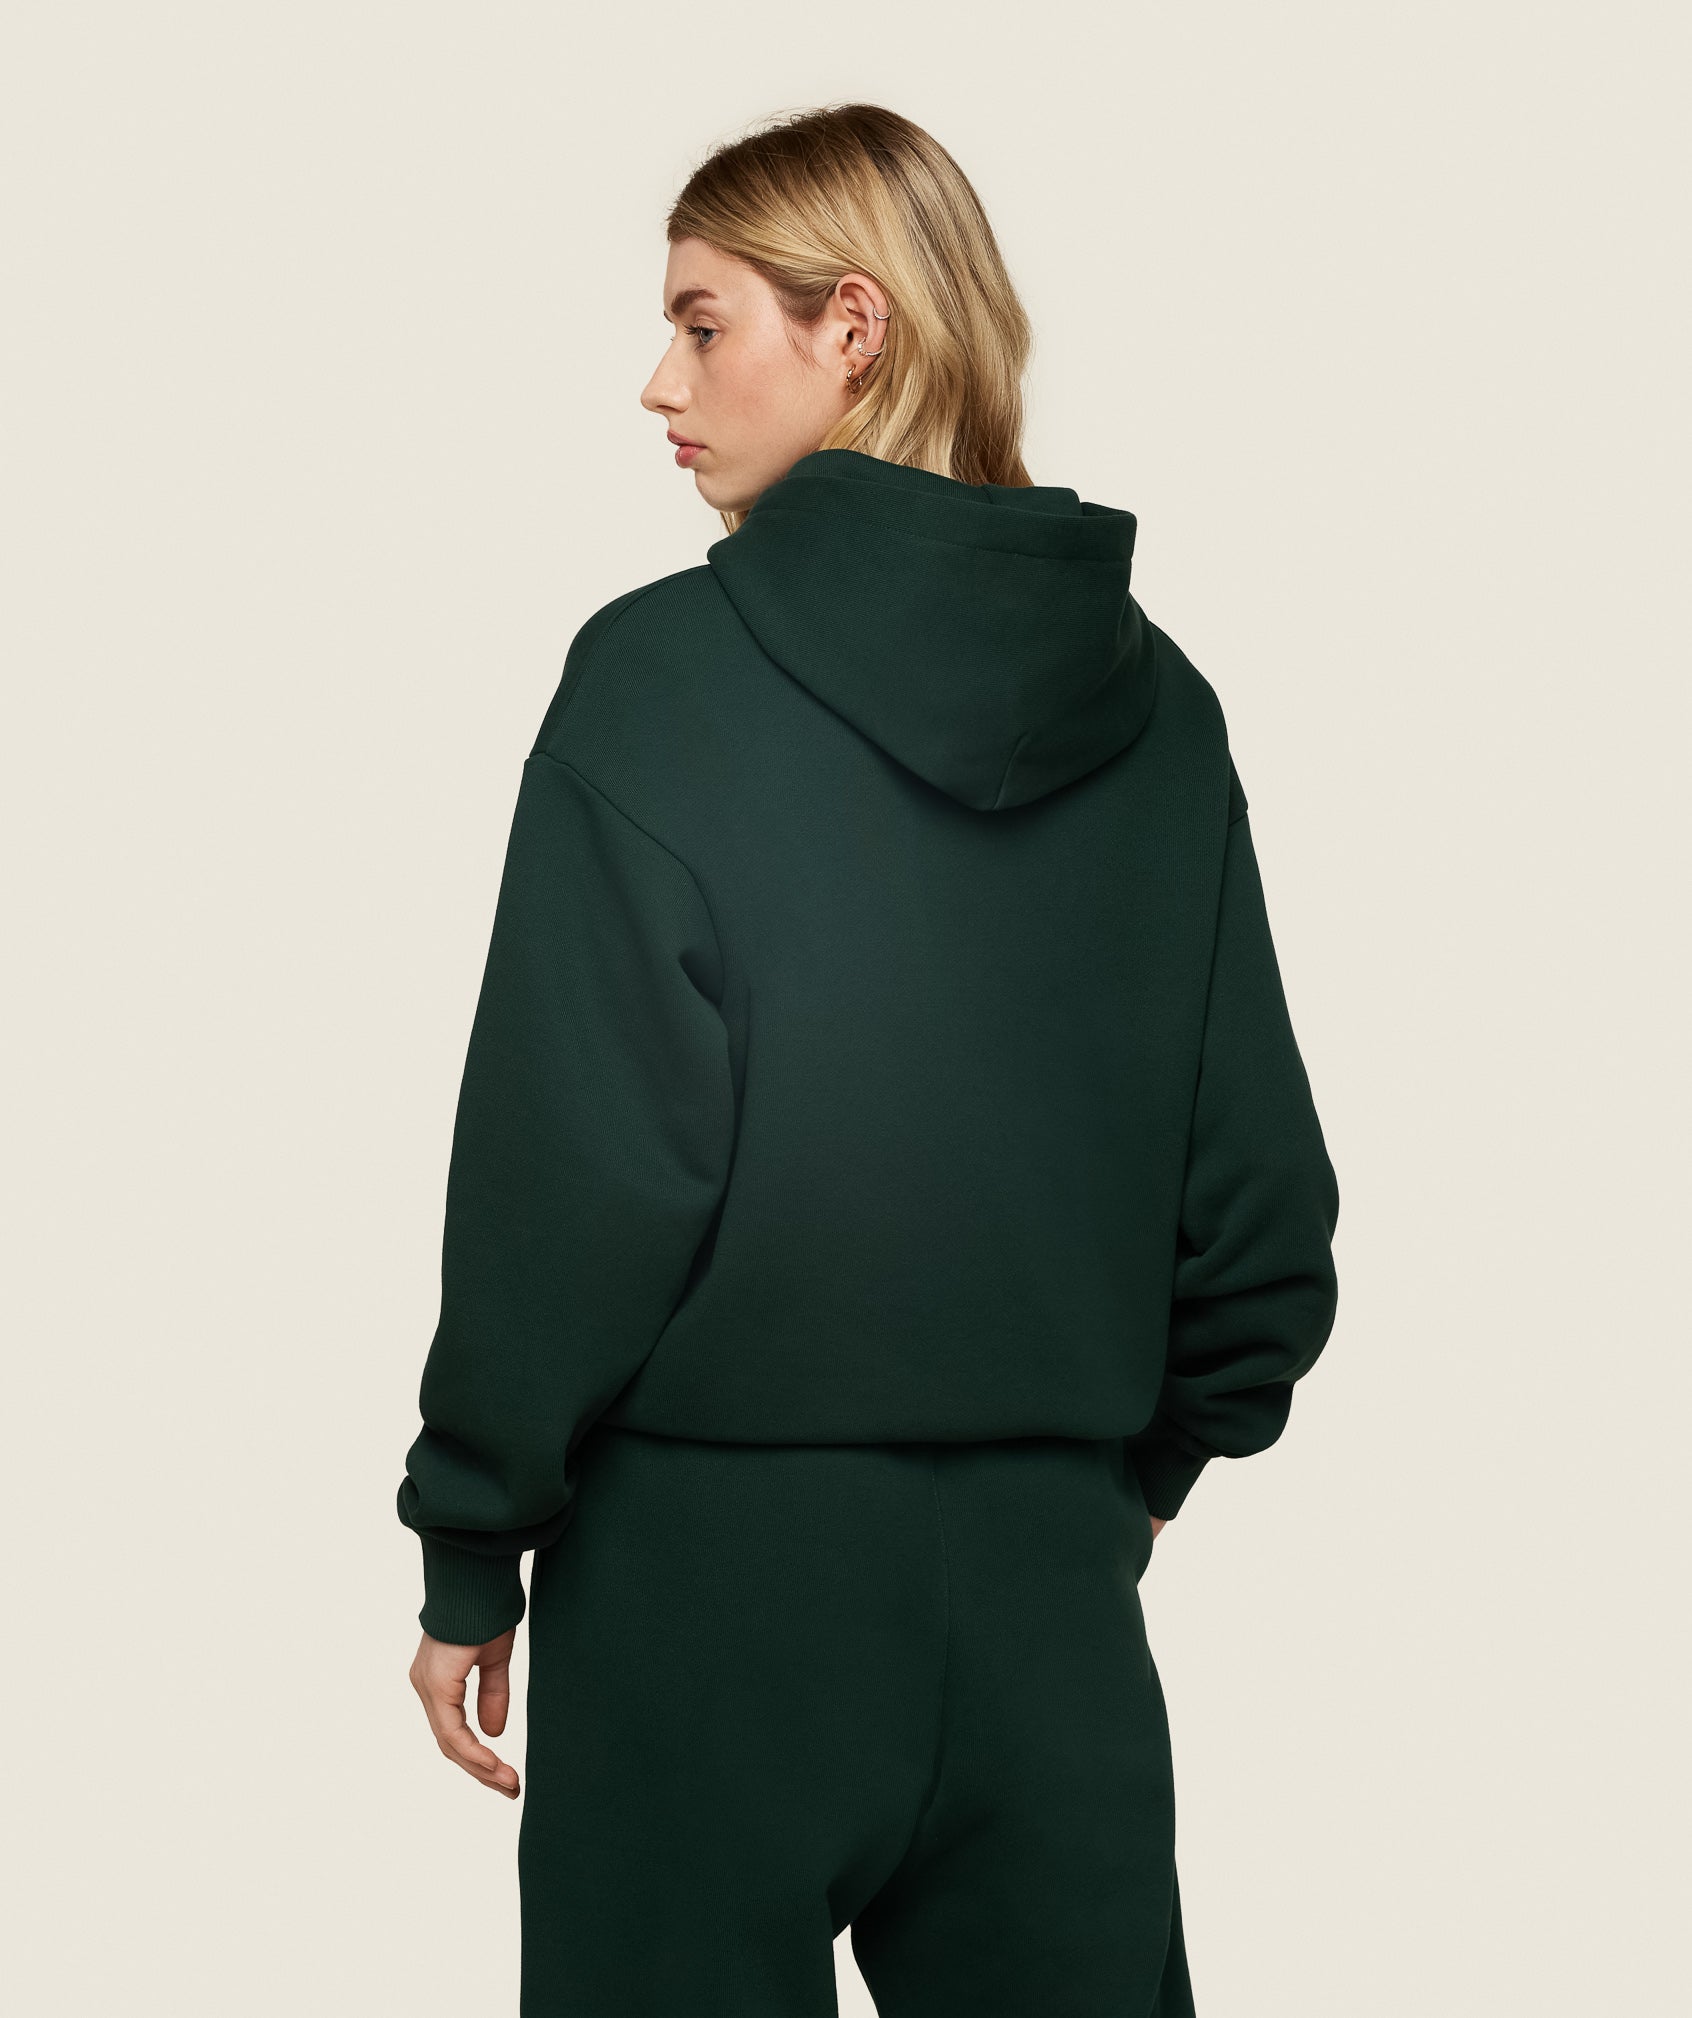 Phys Ed Graphic Hoodie in Green - view 4